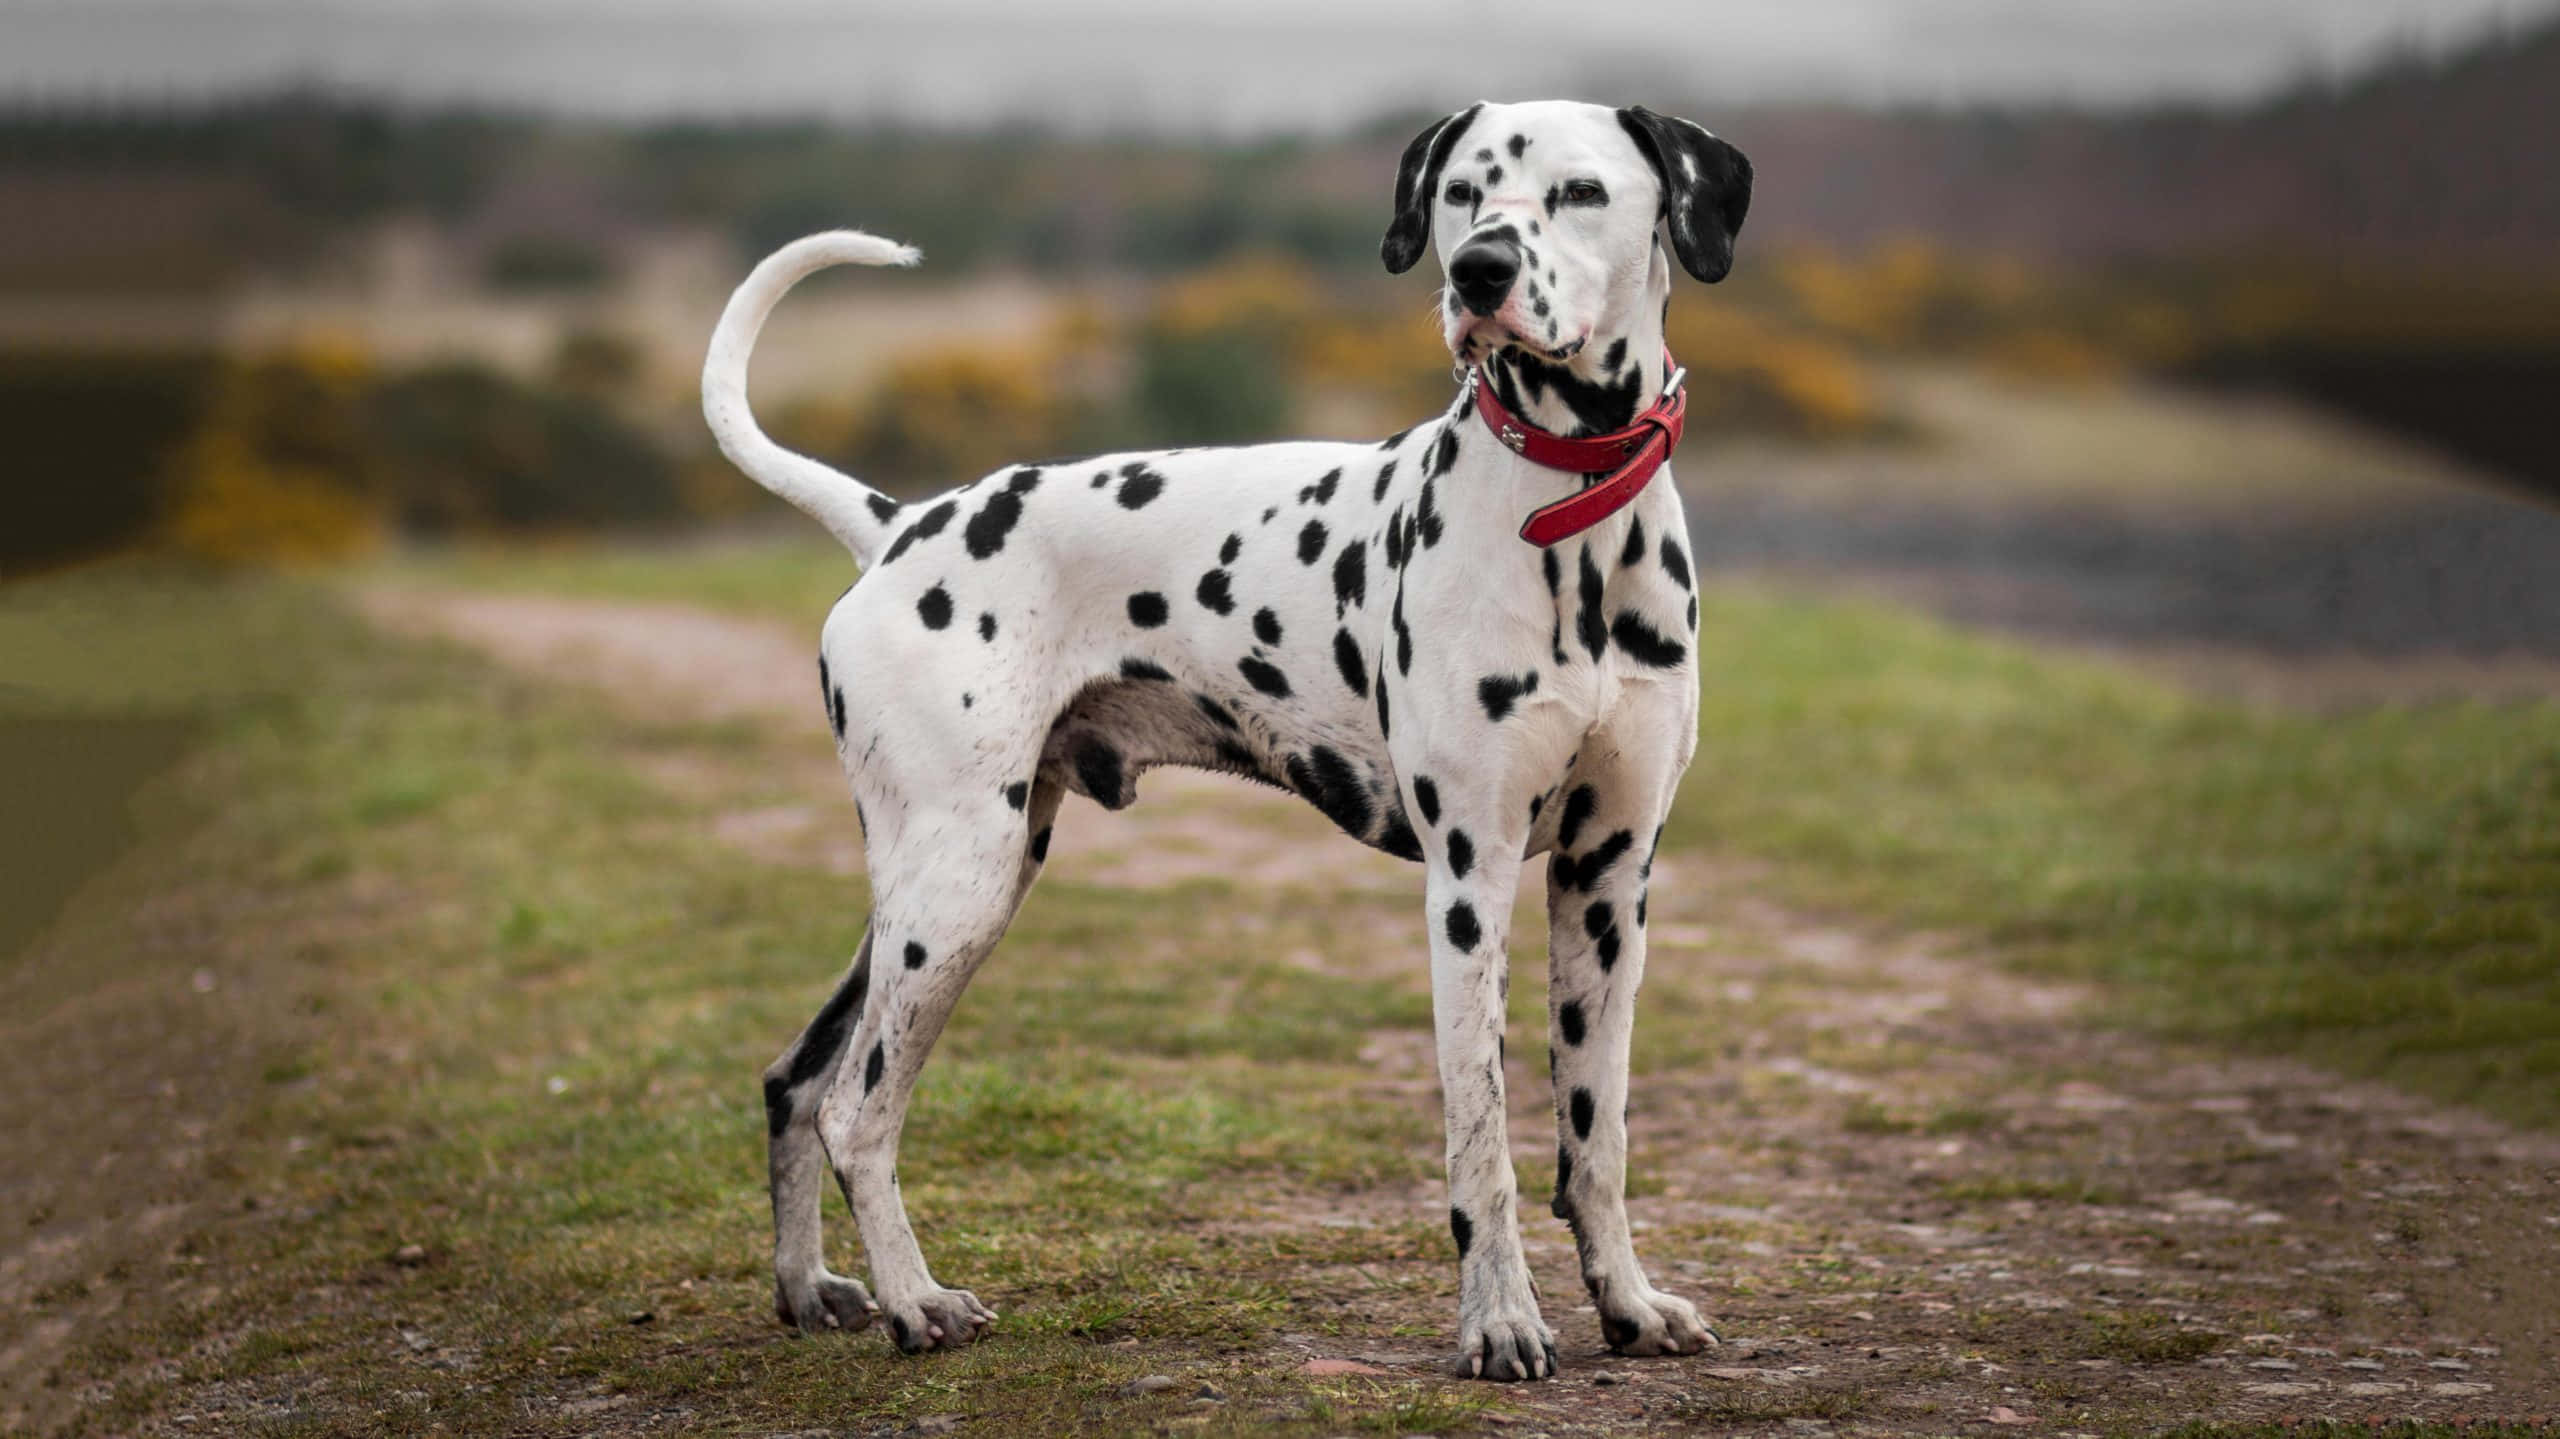 Bold and Brave - A Dalmatian Dog in All Its Splendor